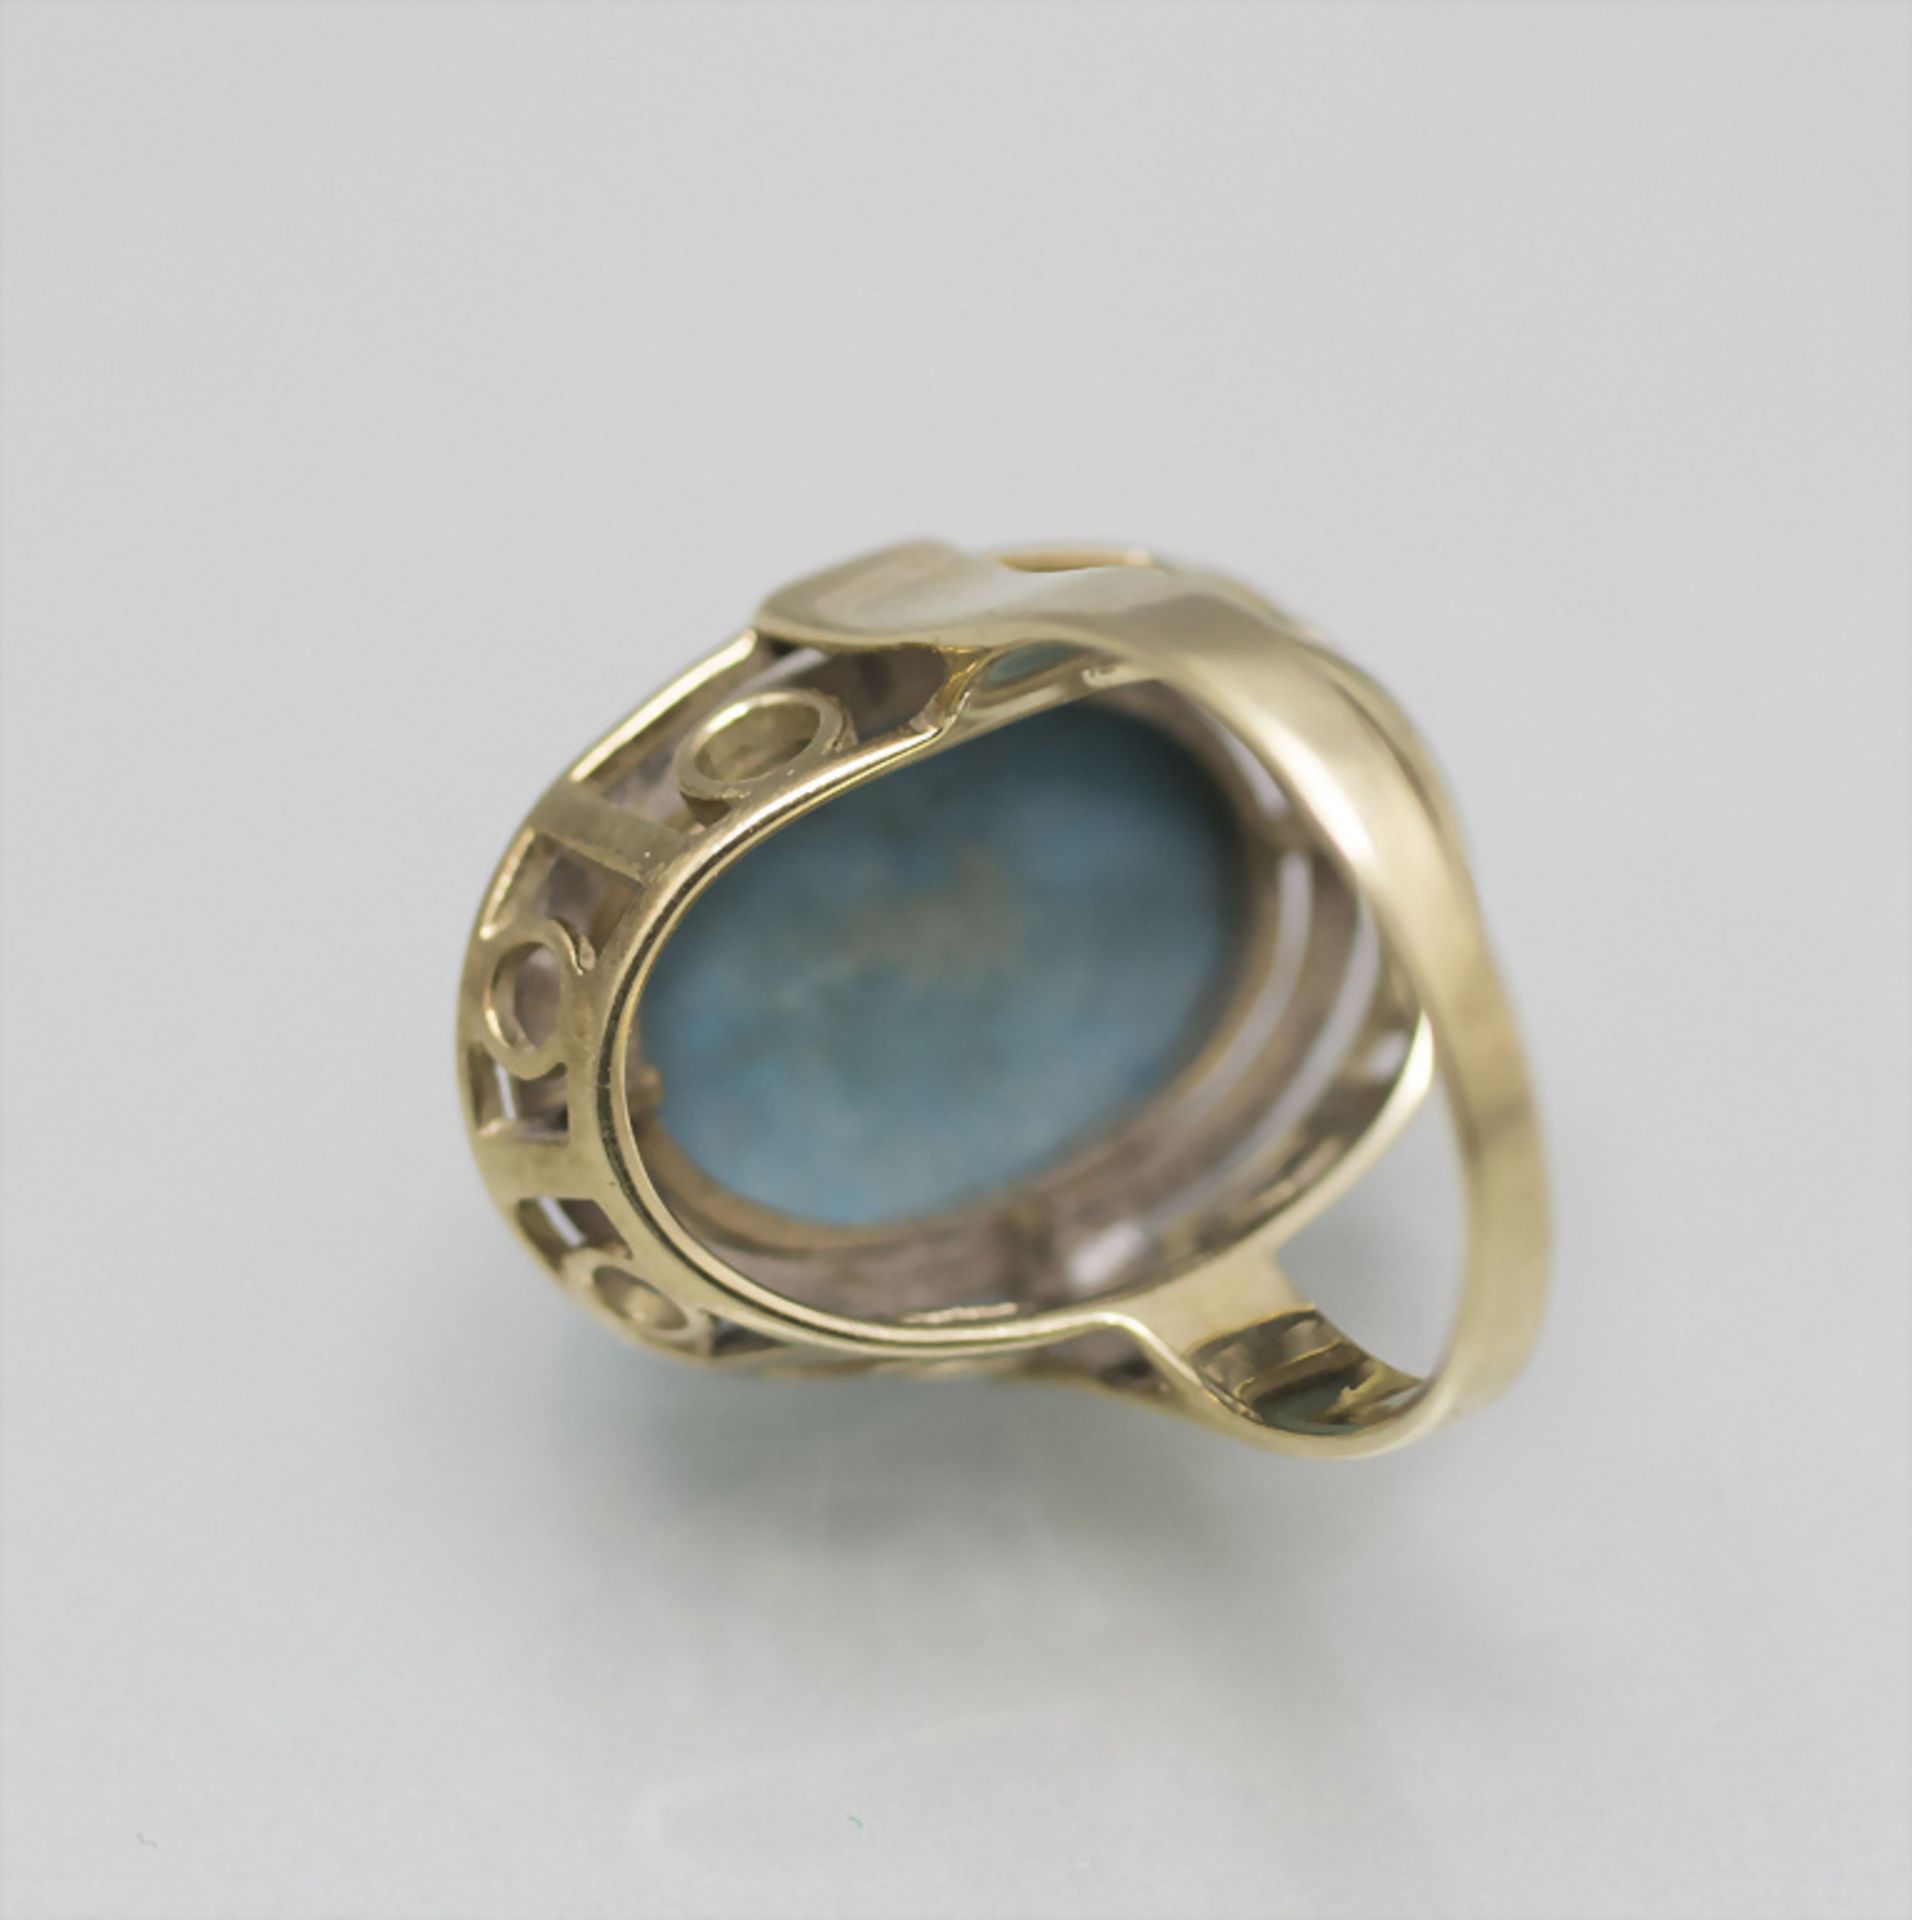 Damenring mit Türkis / A ladies 14 ct gold ring with turquoise - Image 2 of 2